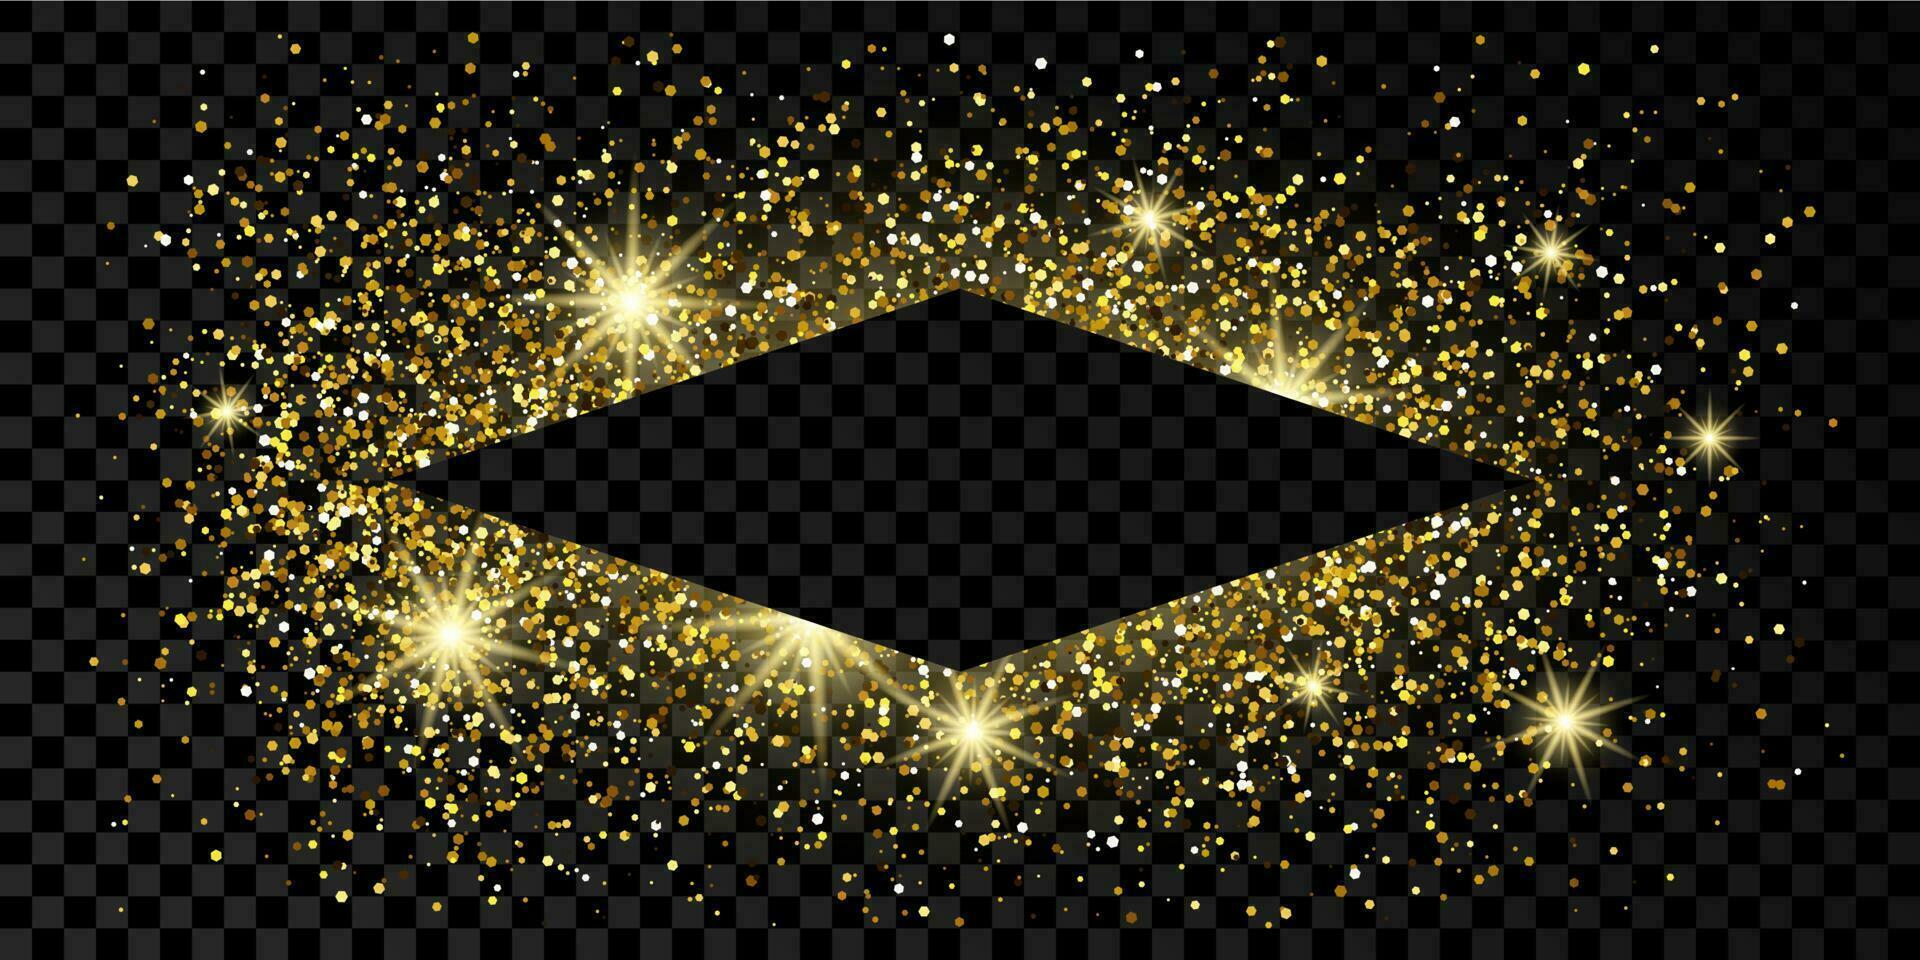 Golden rhombus frame with glitter, sparkles and flares on dark background. Empty luxury backdrop. Vector illustration.